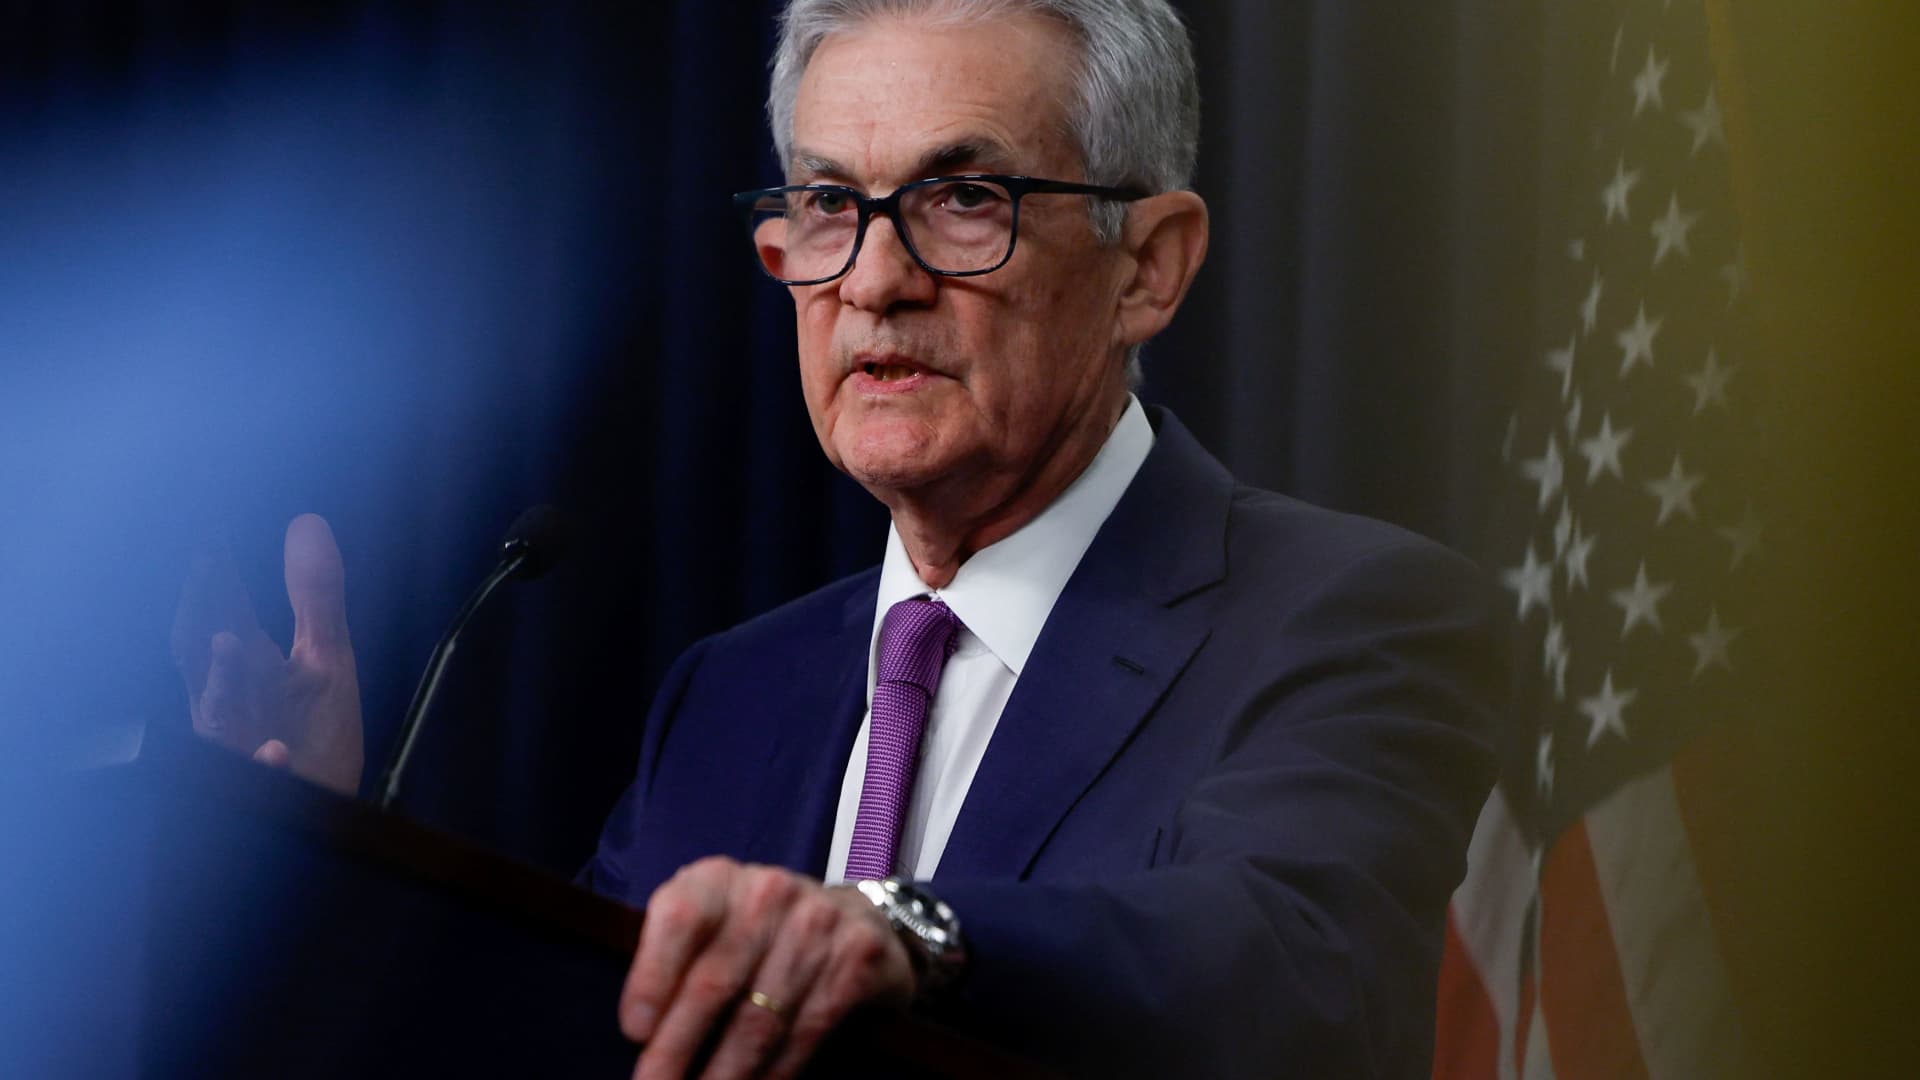 Here's everything to expect from the Federal Reserve's policy meeting Wednesday